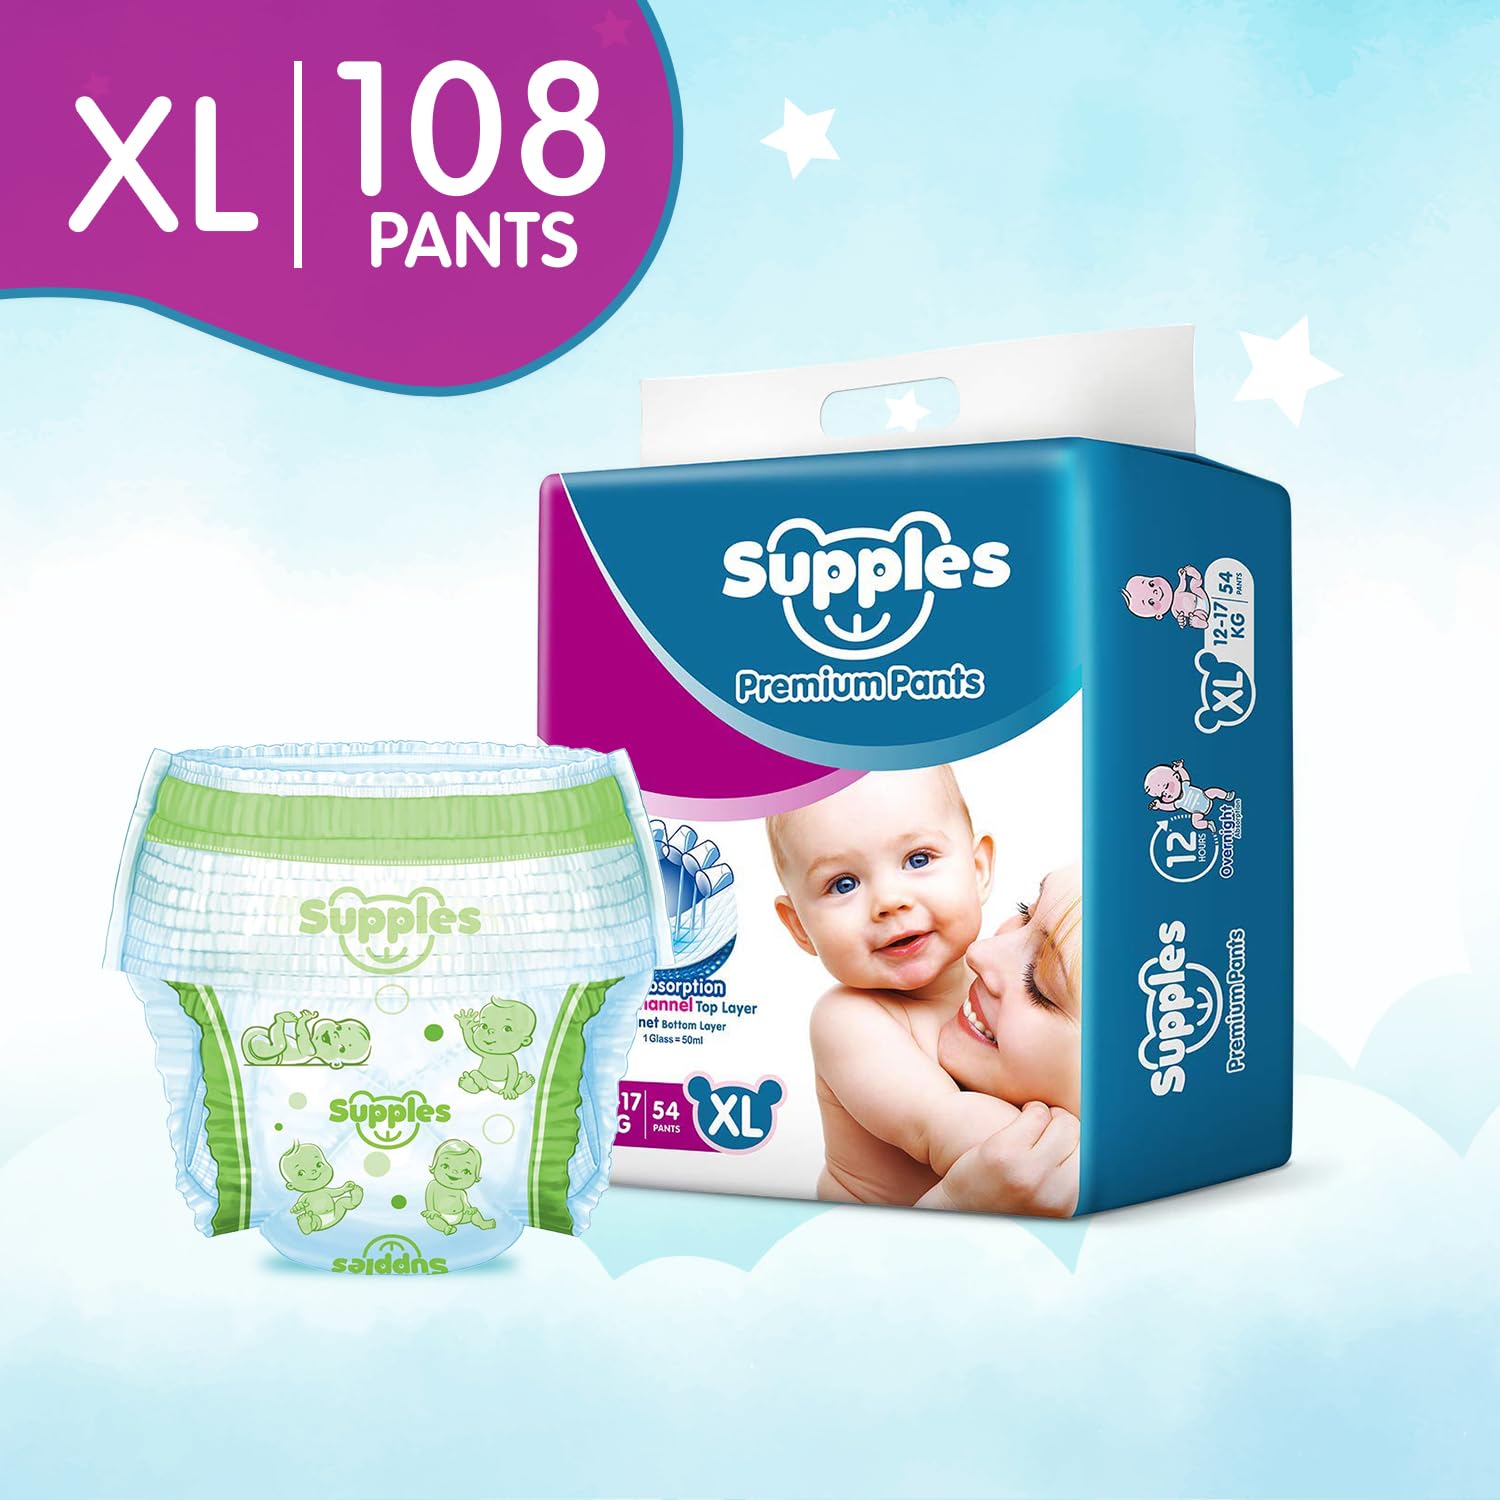 Huggies Complete Comfort Dry Pants Extra Large (XL) Size Baby Diaper Pants,  13 count, with 5 in 1 Comfort